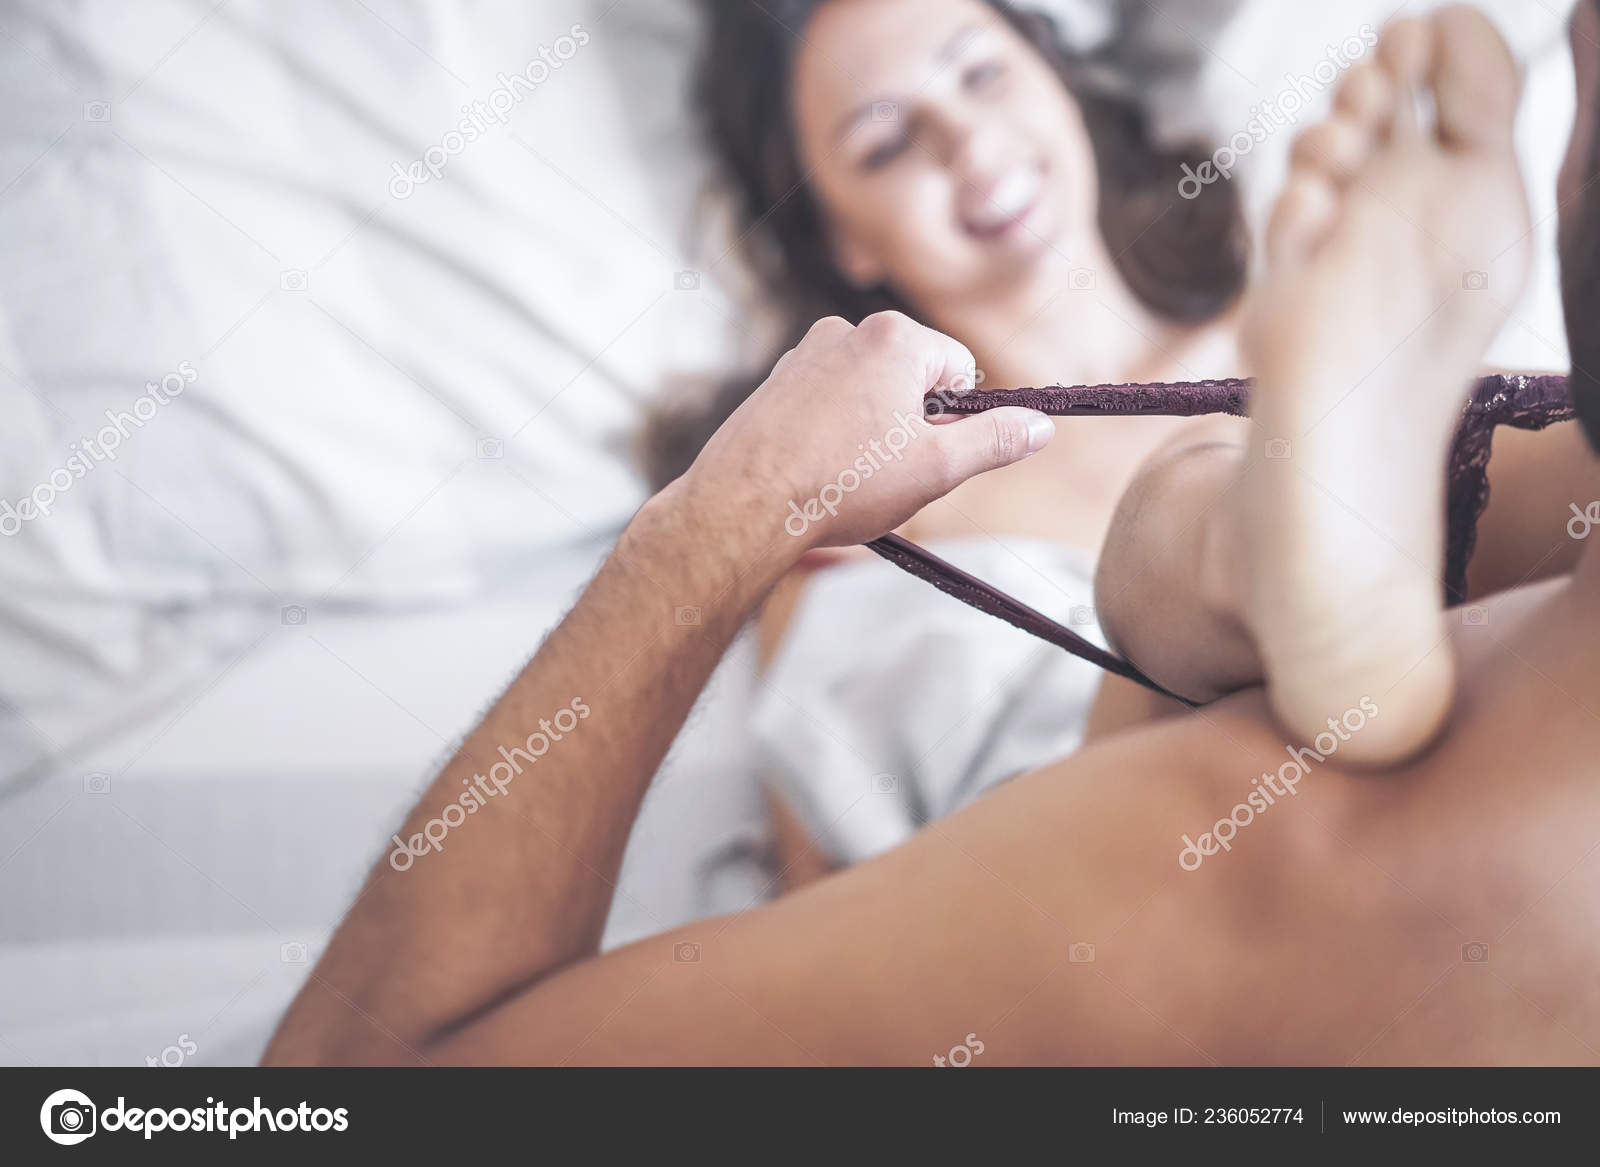 Boyfriend Putting His Girlfriends Panties Having Sex Bed Passionate Couple Stock Photo by ©AlessandroBiascioli 236052774